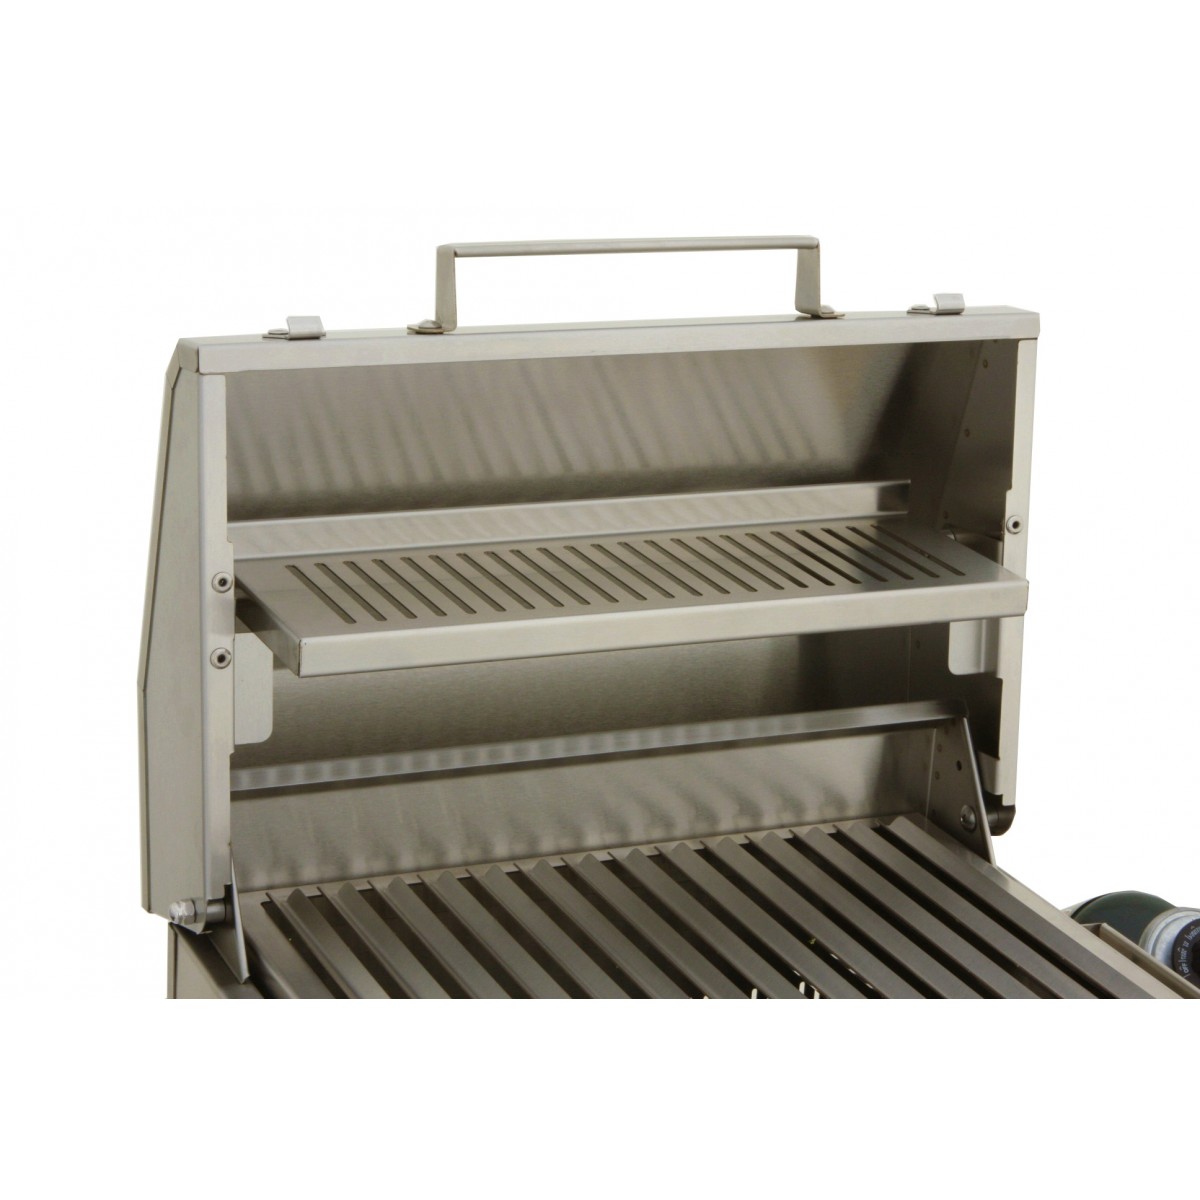 Solaire SOL-IR17BWR Portable Infrared Gas Grill With Free Carrying Bag & Warming Rack, Stainless Steel - image 5 of 6